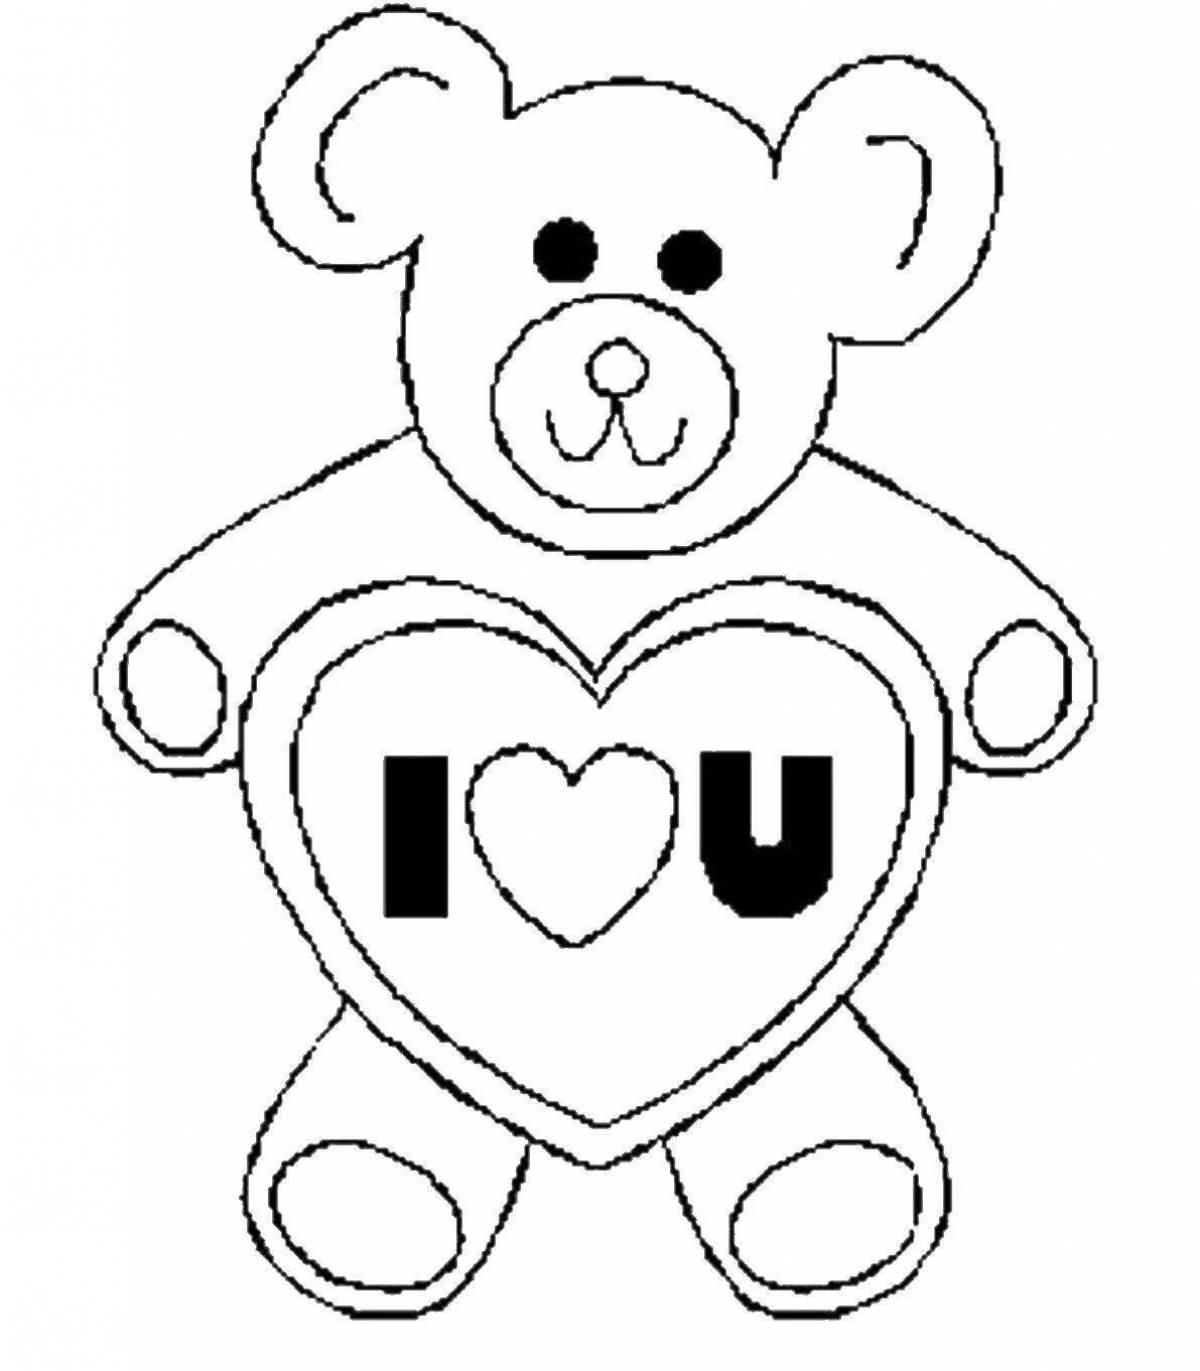 Cute teddy bear with heart coloring book